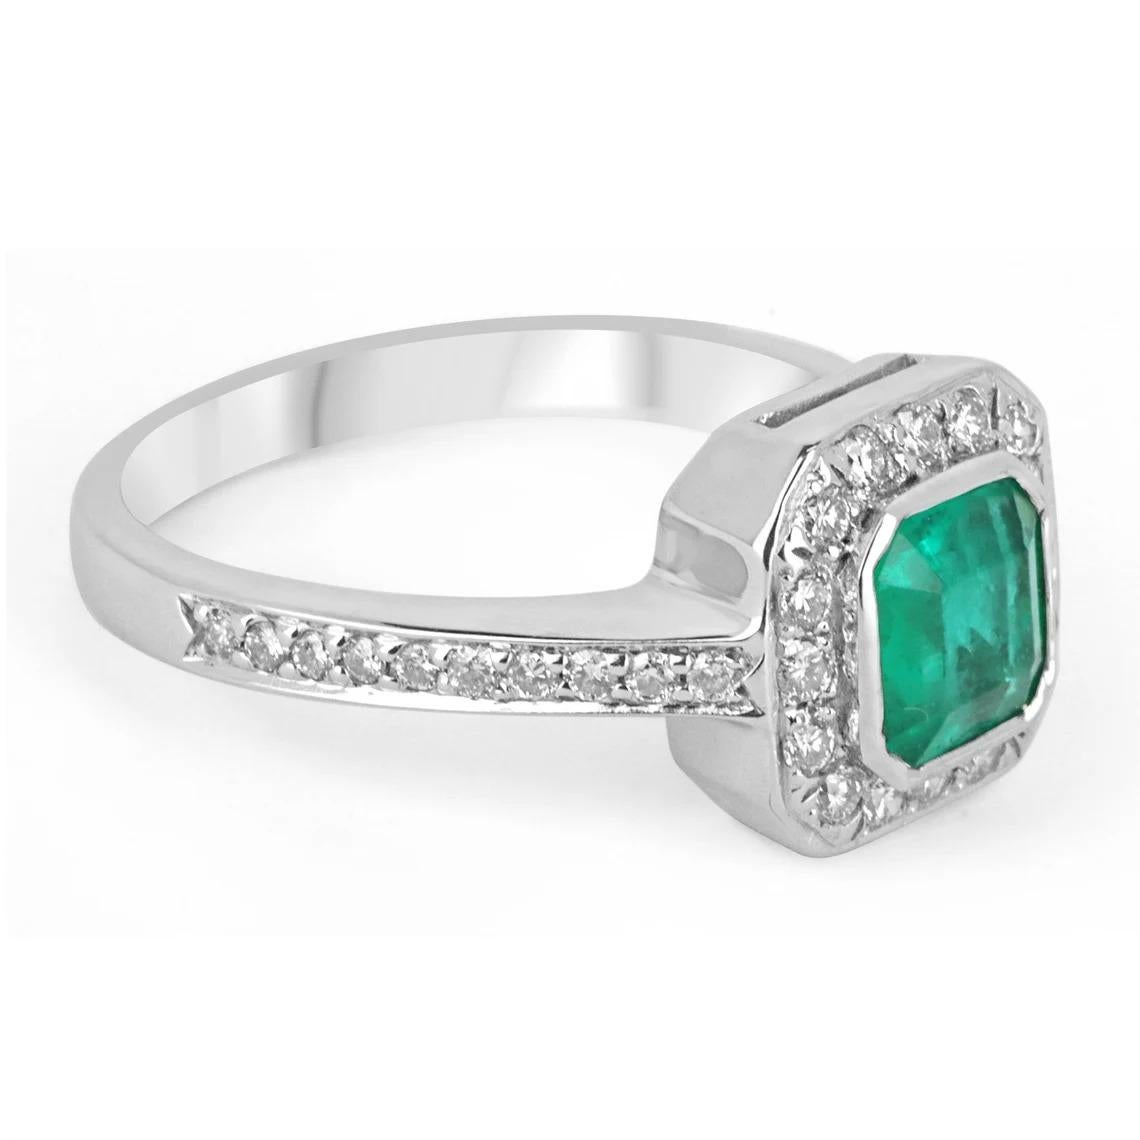 Featured is this beautiful emerald and diamond engagement ring. Stunning from any angle is this full 0.95-carat, Colombian emerald. Cut in the shape of an Asscher, with a gorgeously vivid, medium-dark green color. The stone is accented with